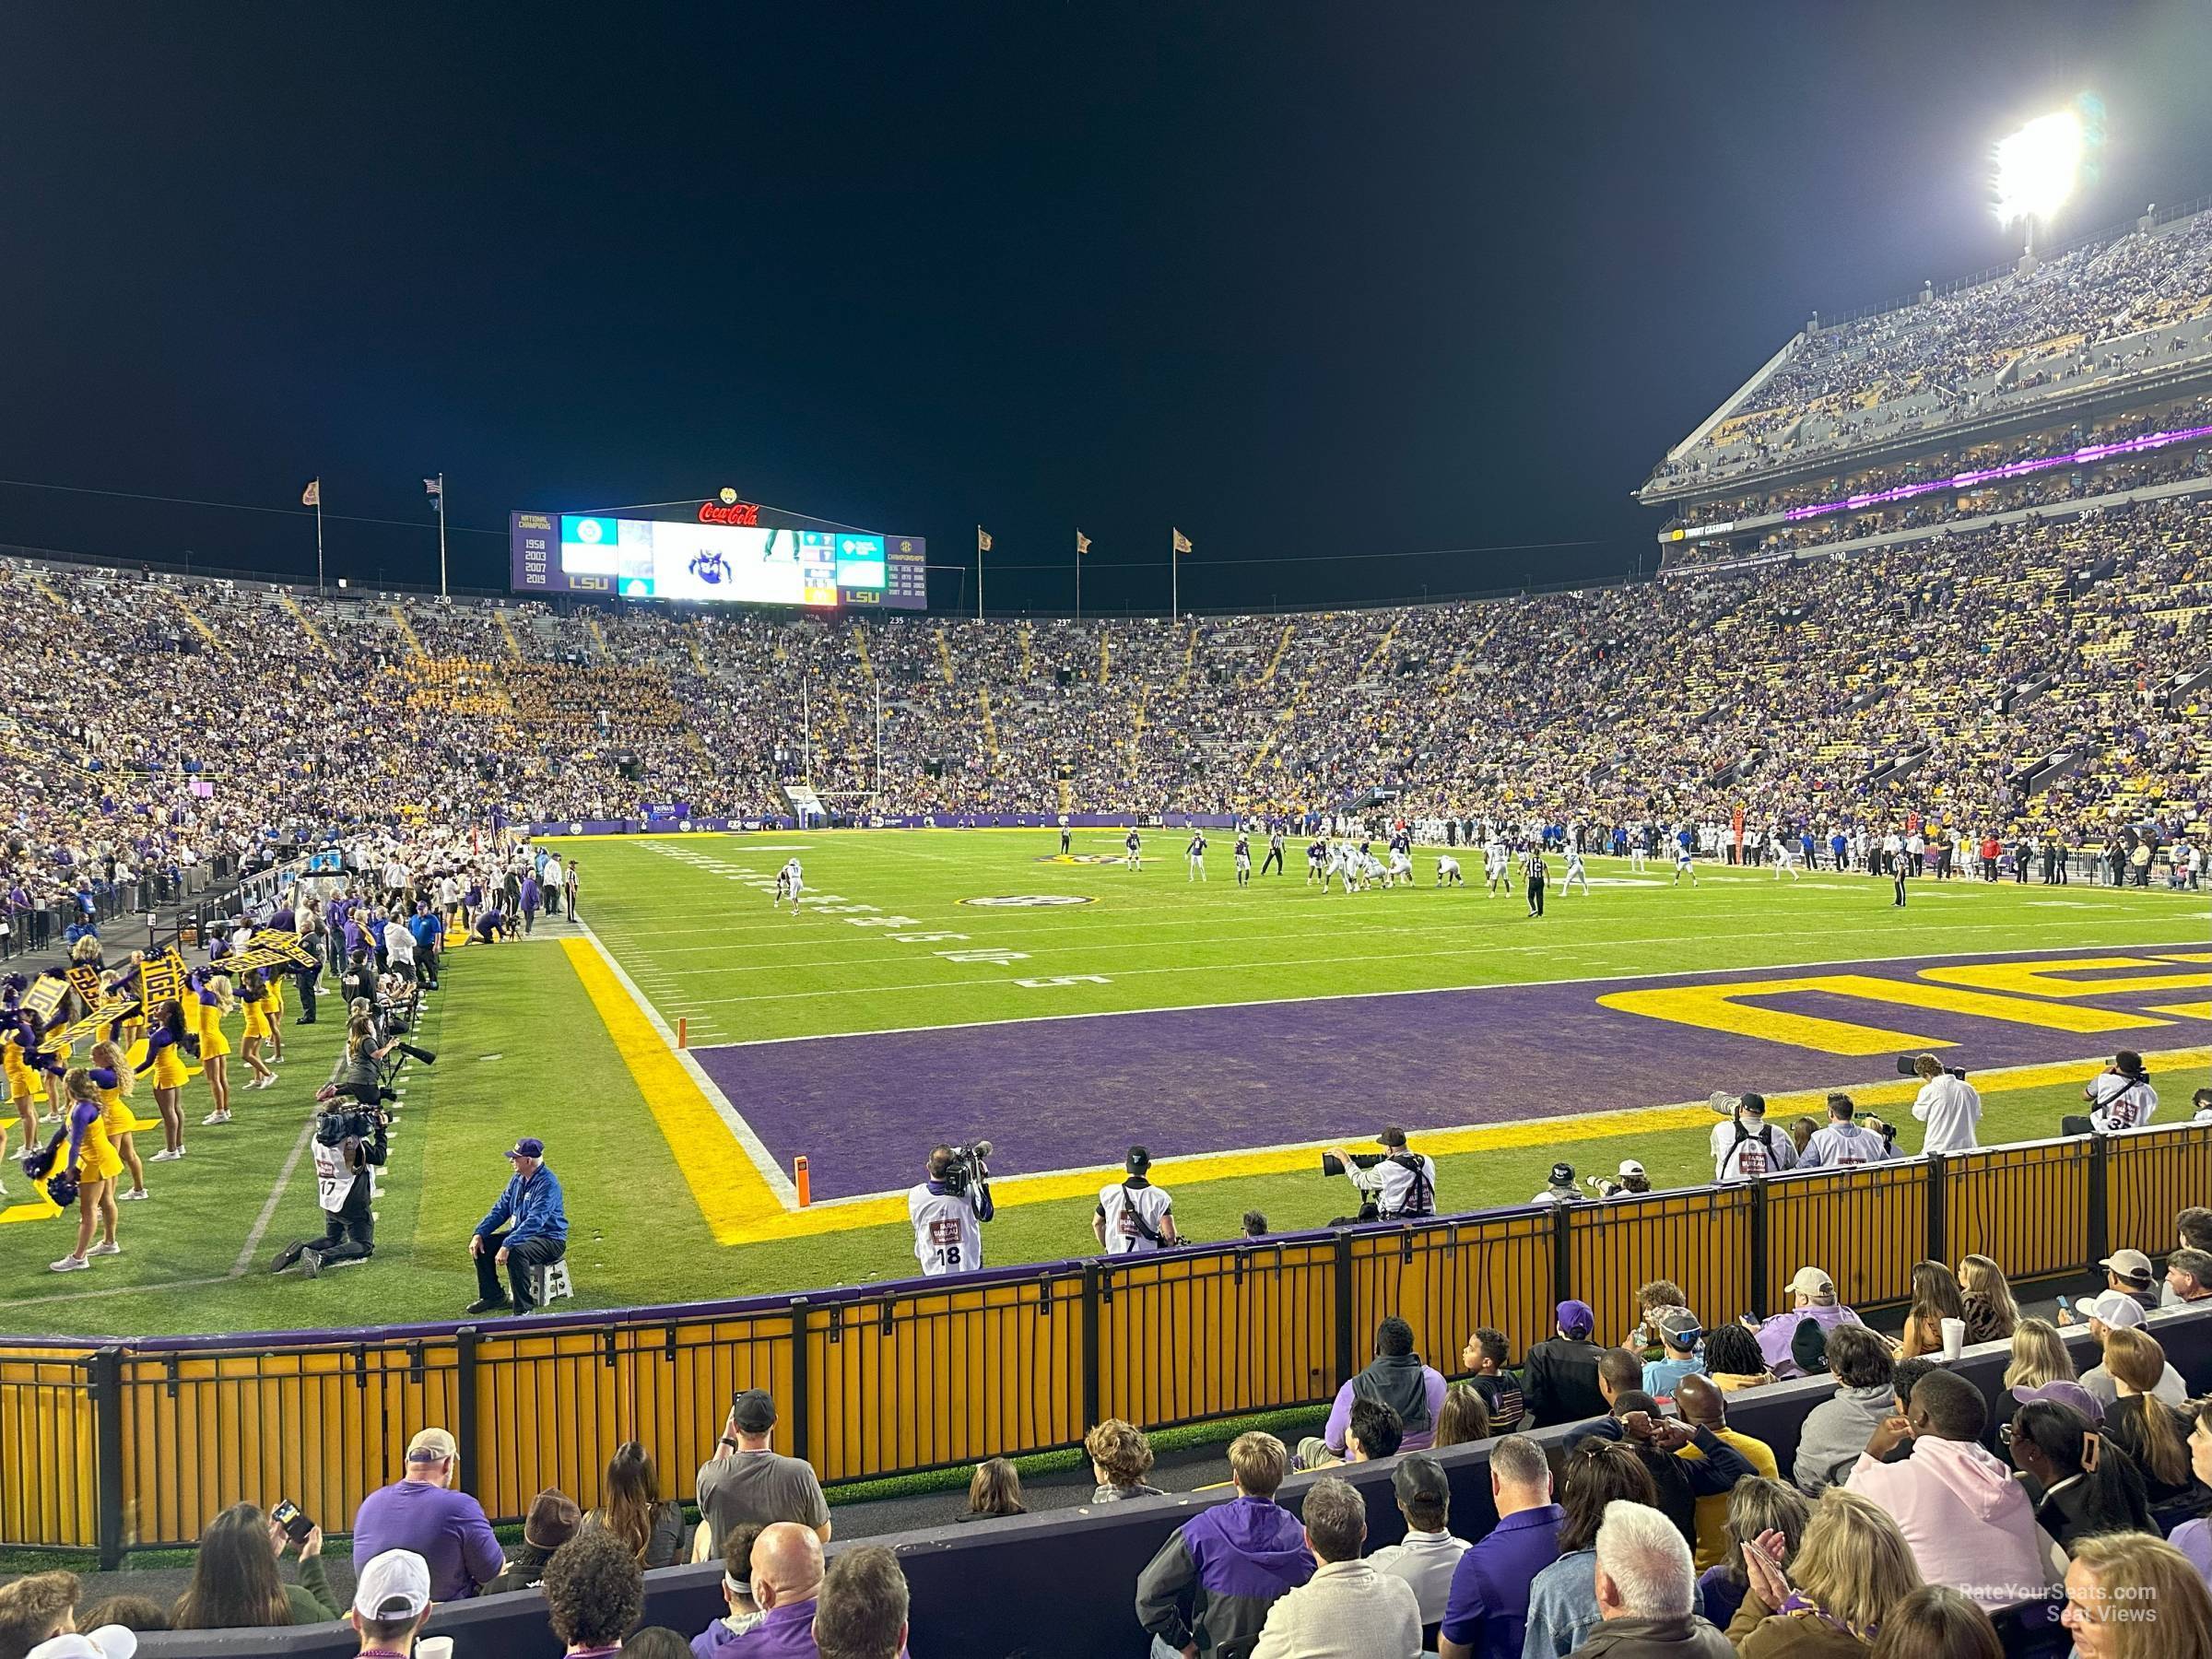 Section 407 at Tiger Stadium - RateYourSeats.com